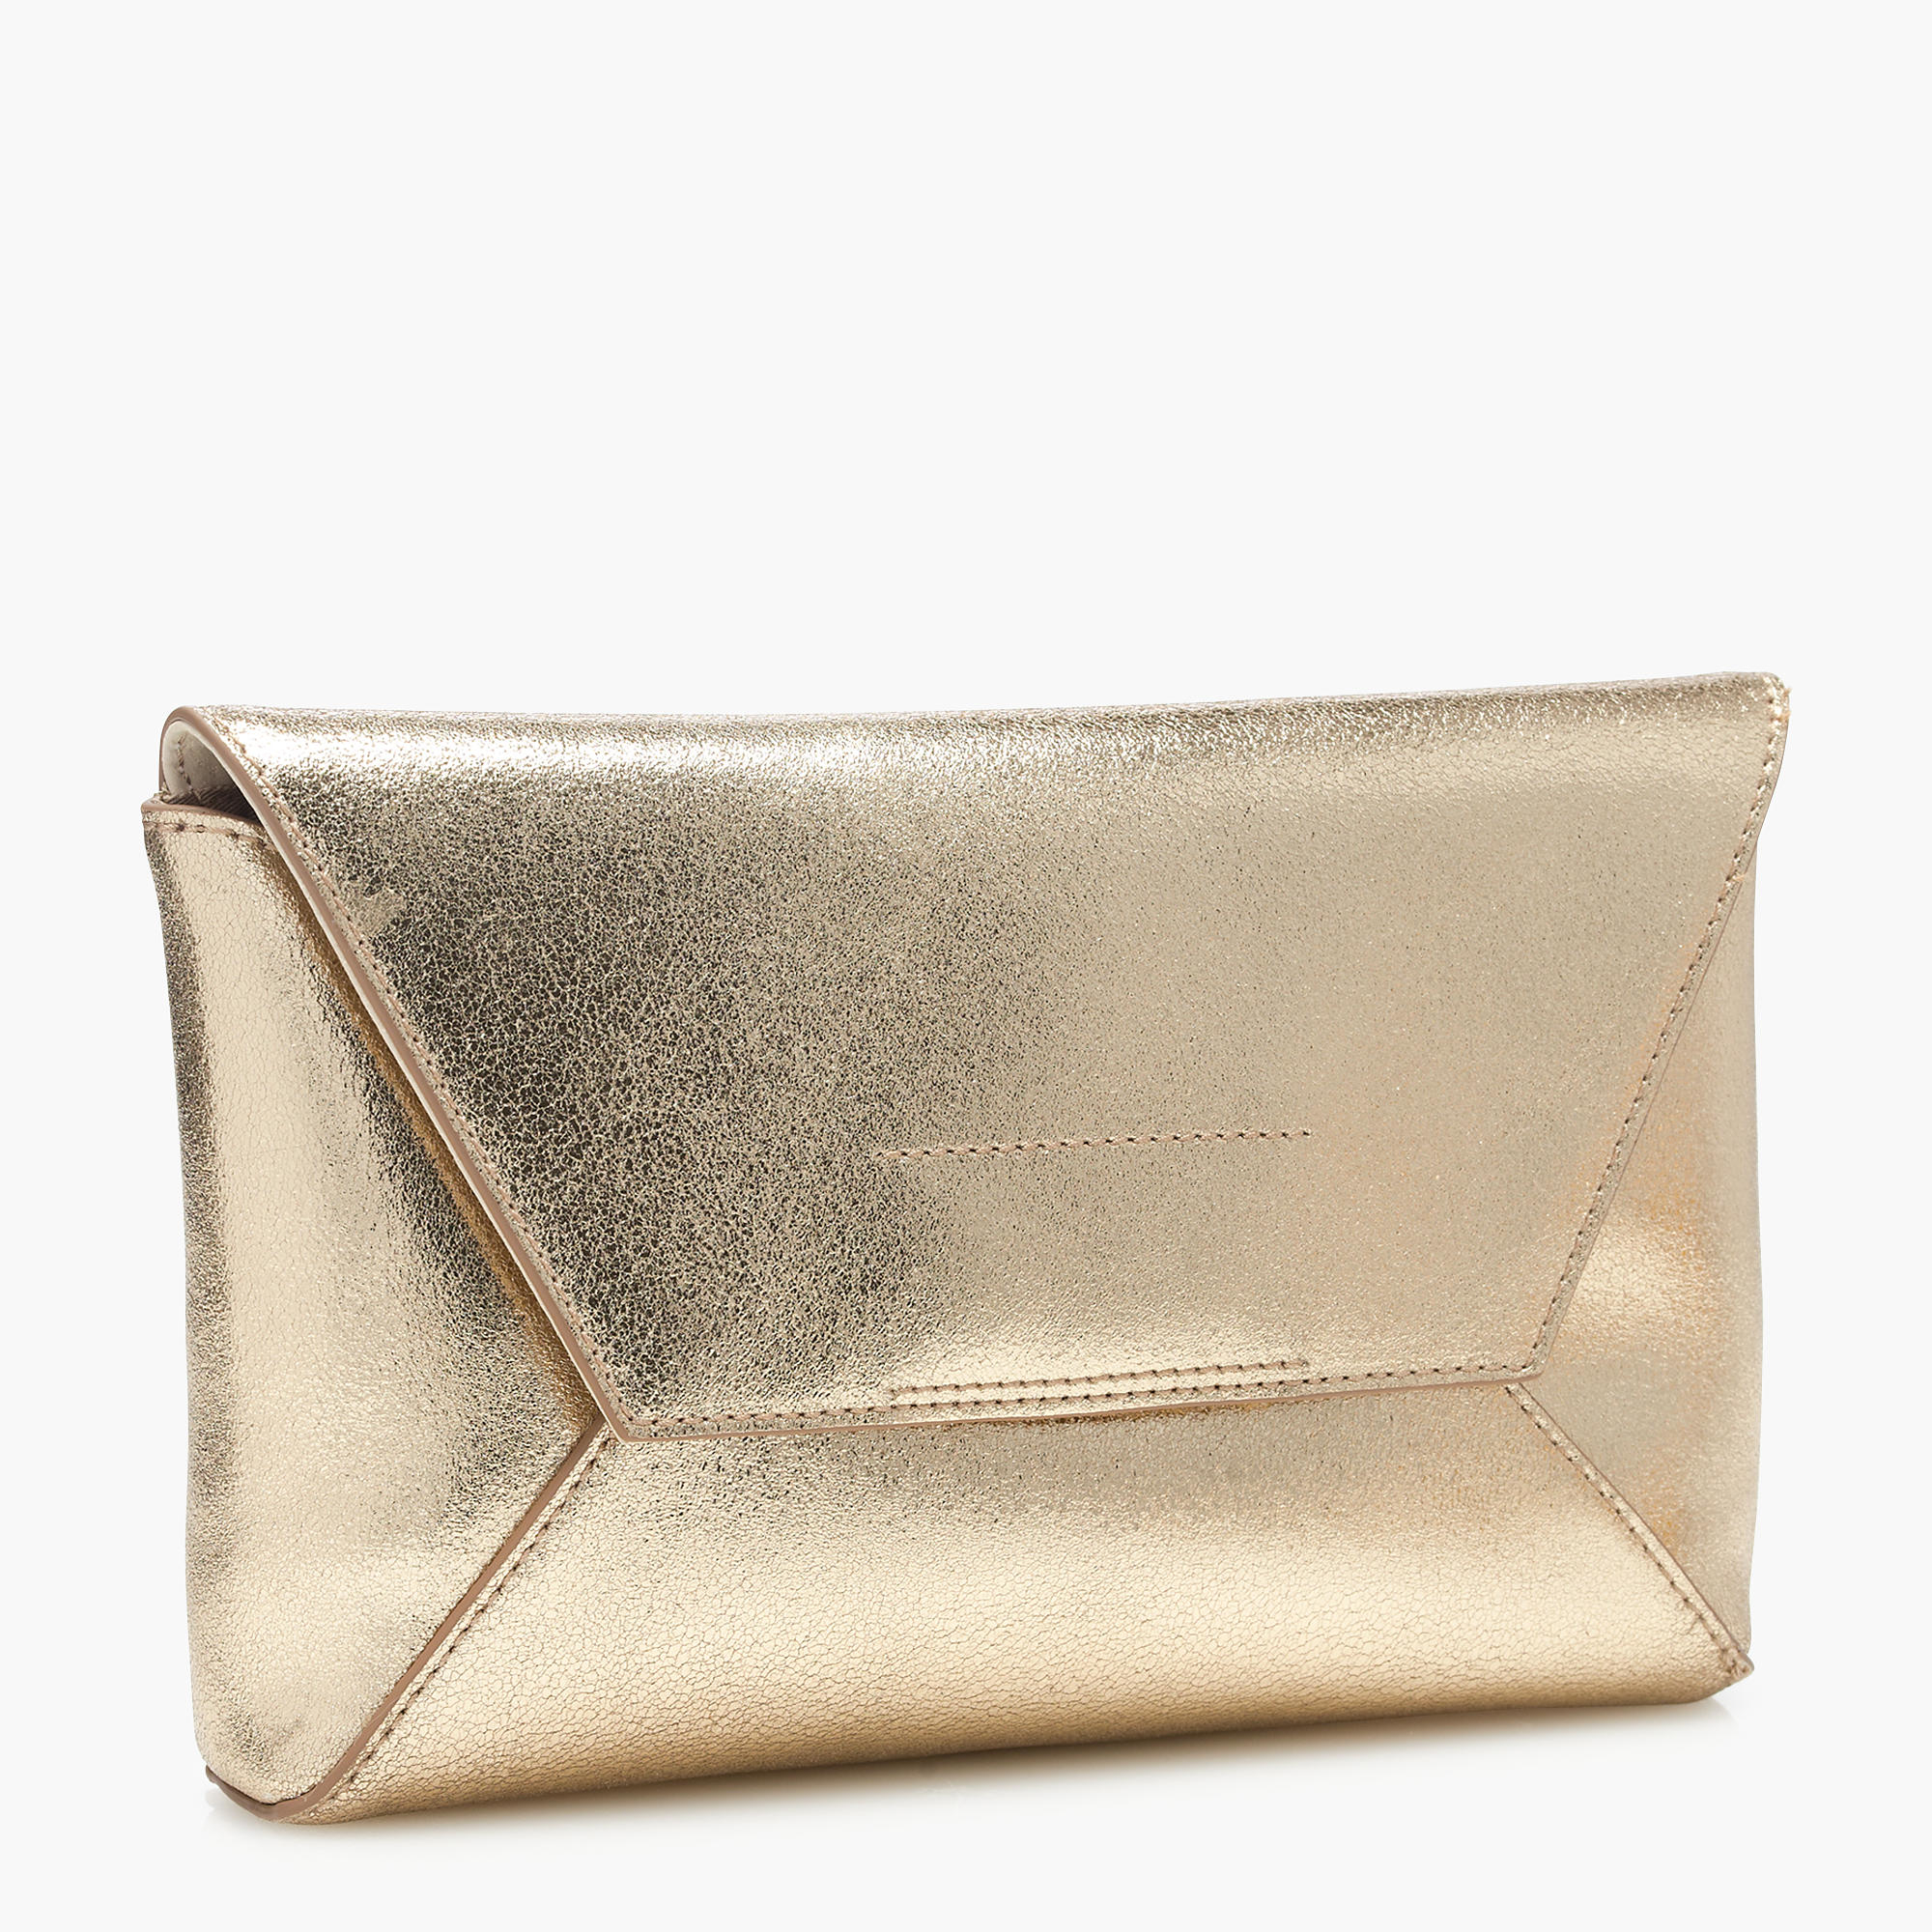 J.Crew Leather Envelope Clutch In Crackled Gold Foil in Metallic